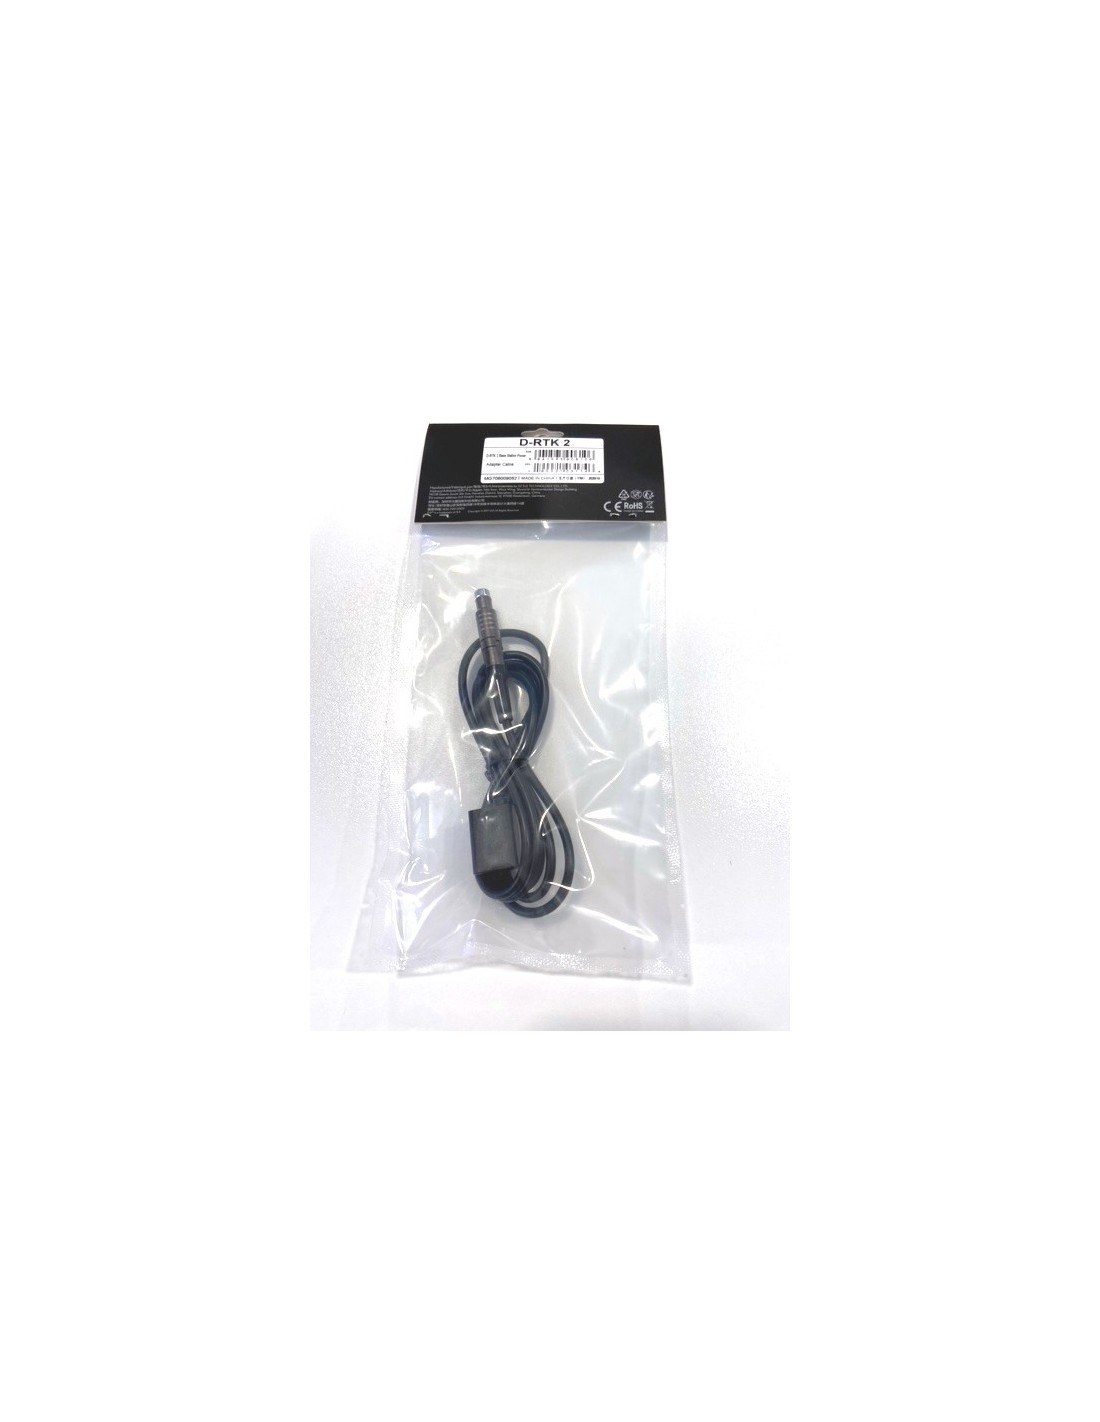 Picture of D-RTK 2 Base Station Power Adapter Cable